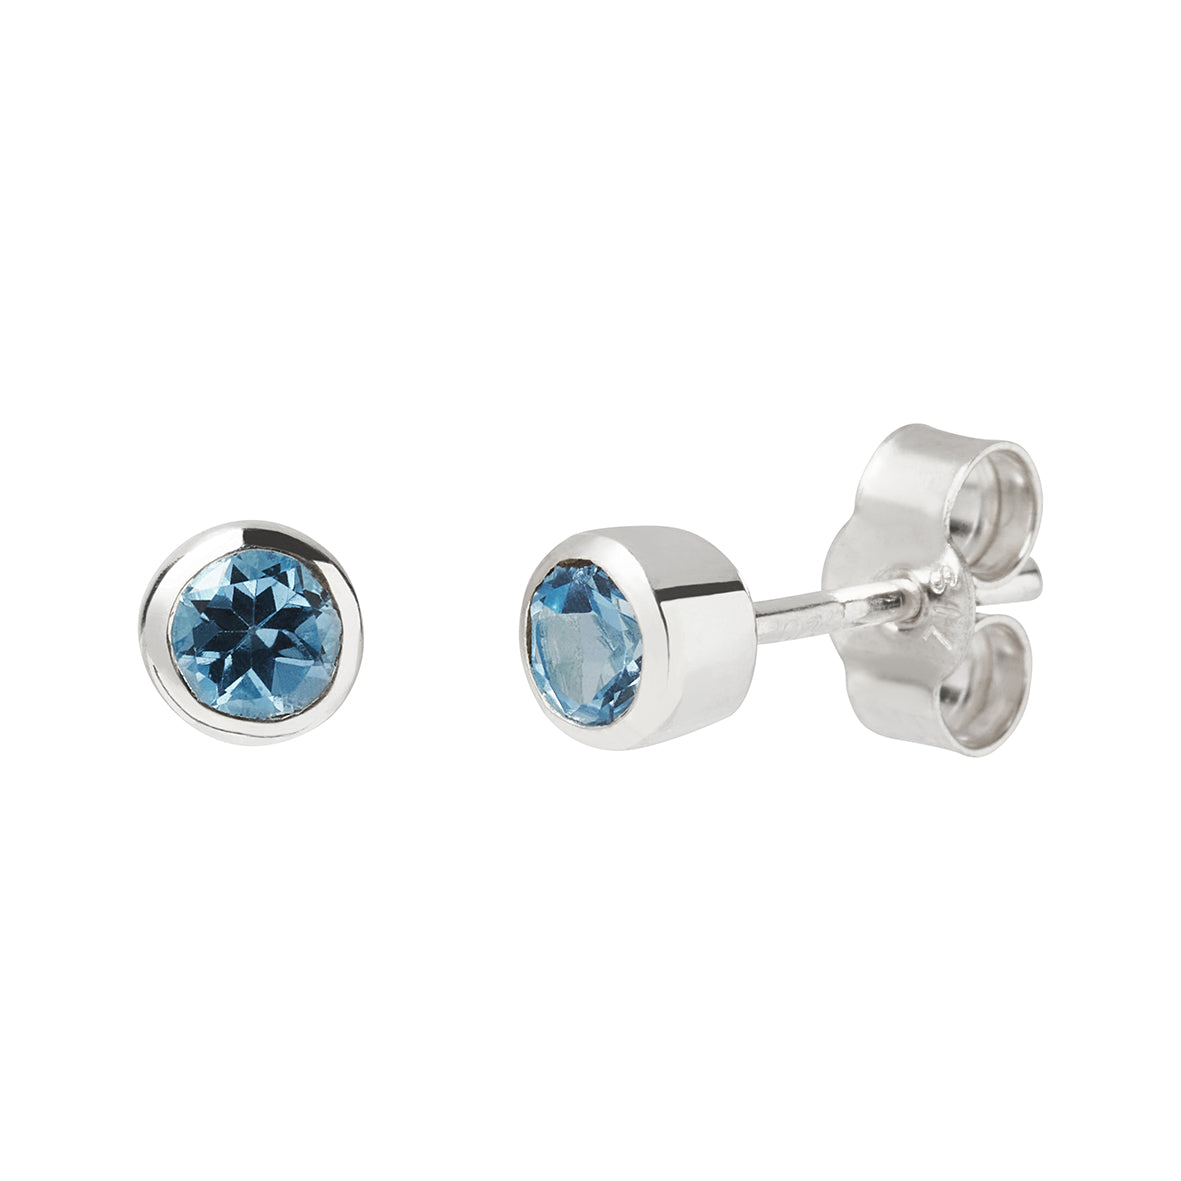 Swiss Blue Topaz 4mm faceted gemstones in a smooth rub over bezel setting stud earrings with butterfly backs on a white background, handmade at Kirsty Taylor Jewellery, Corbridge, Northumberland